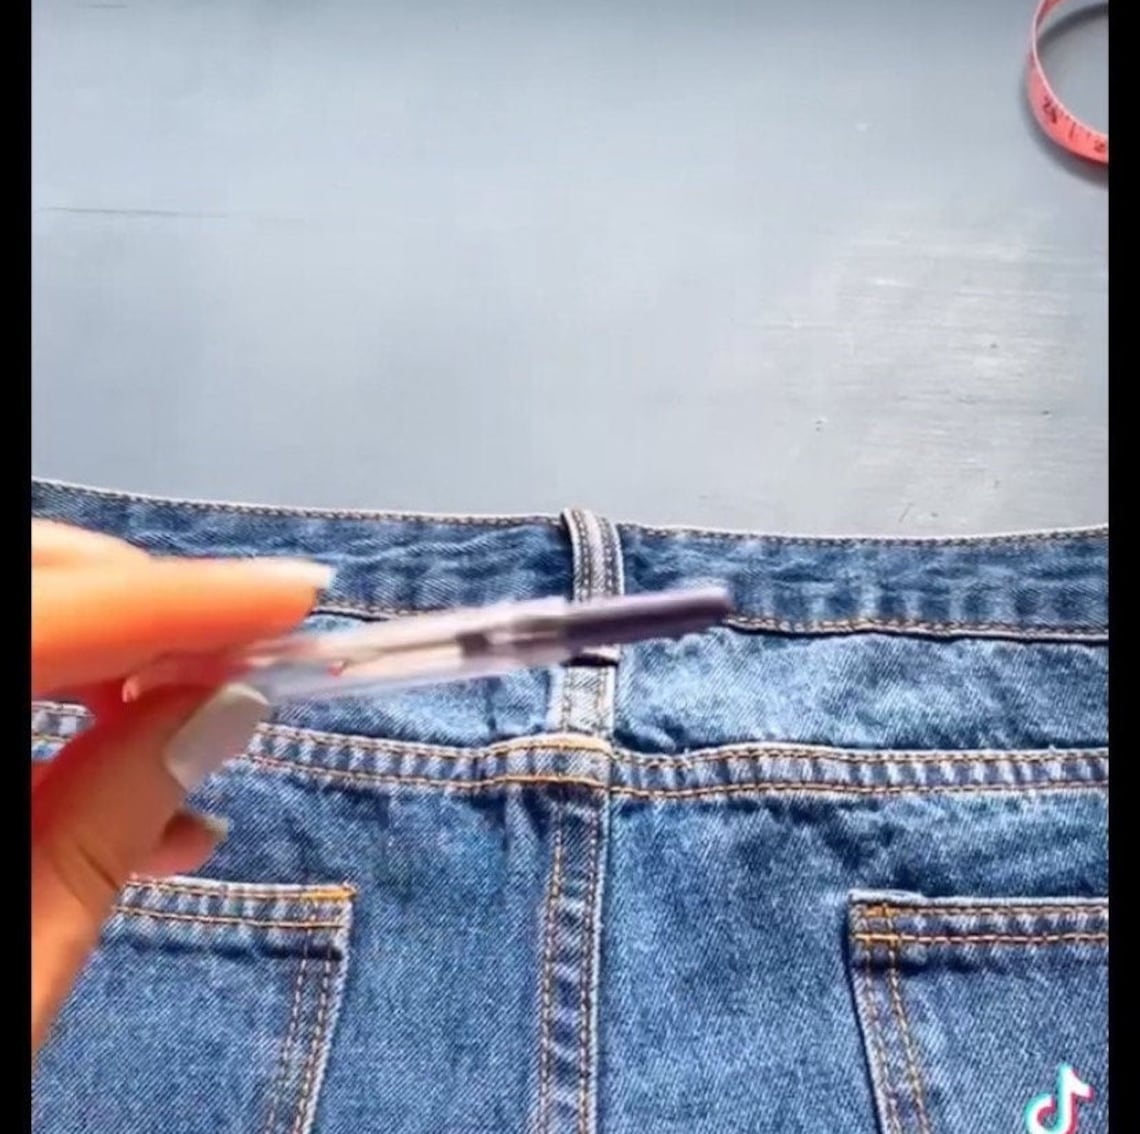 ALTERATIONS / Jeans / Waist Band Alterations / Take in Your Jeans ...